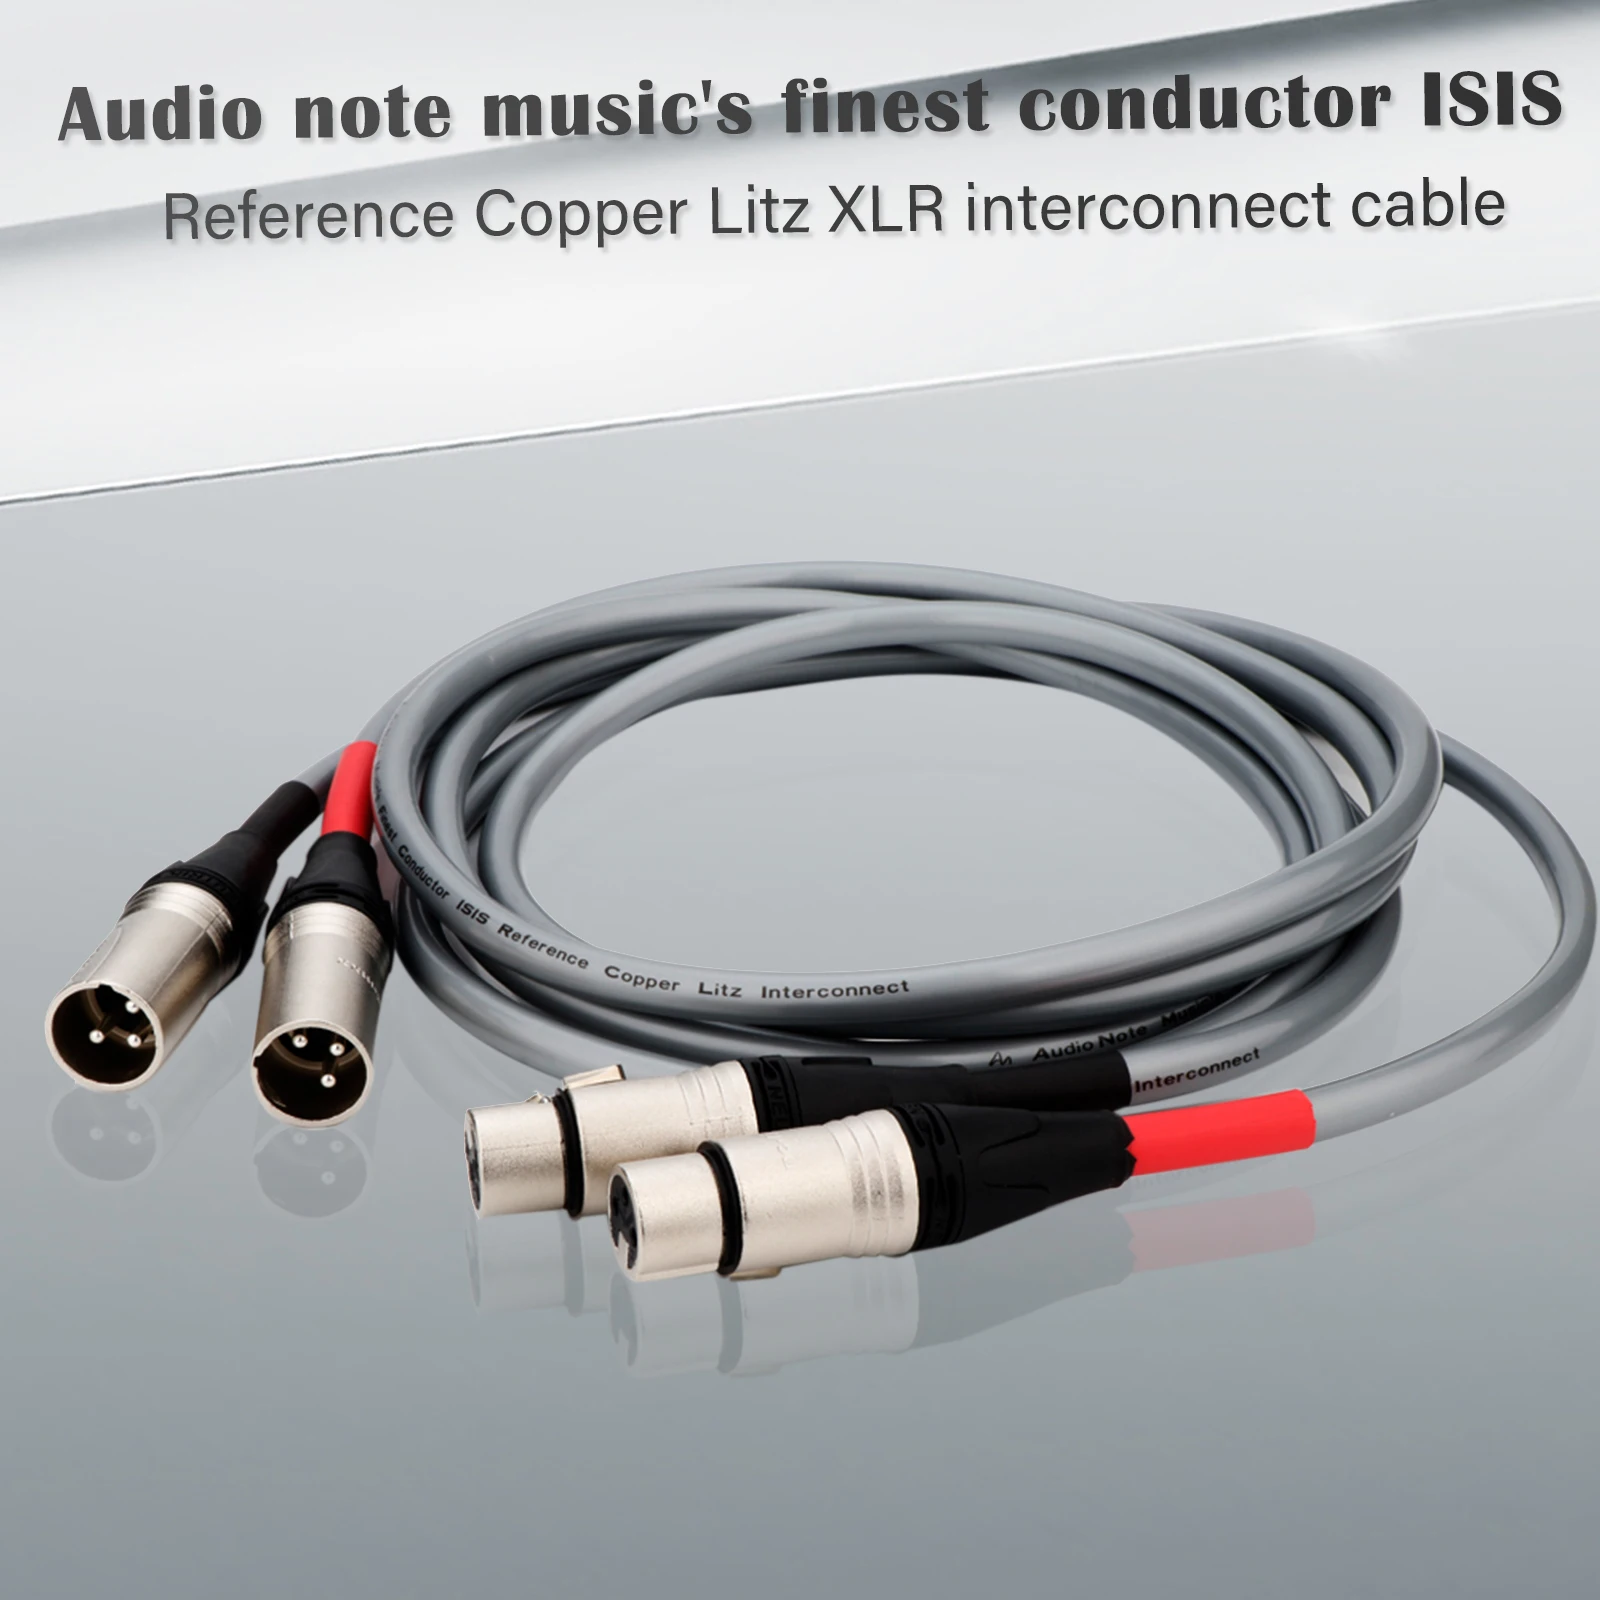 

Audio Note Music's Finest Conductor ISIS Reference Copper Litz XLR interconnect Cable